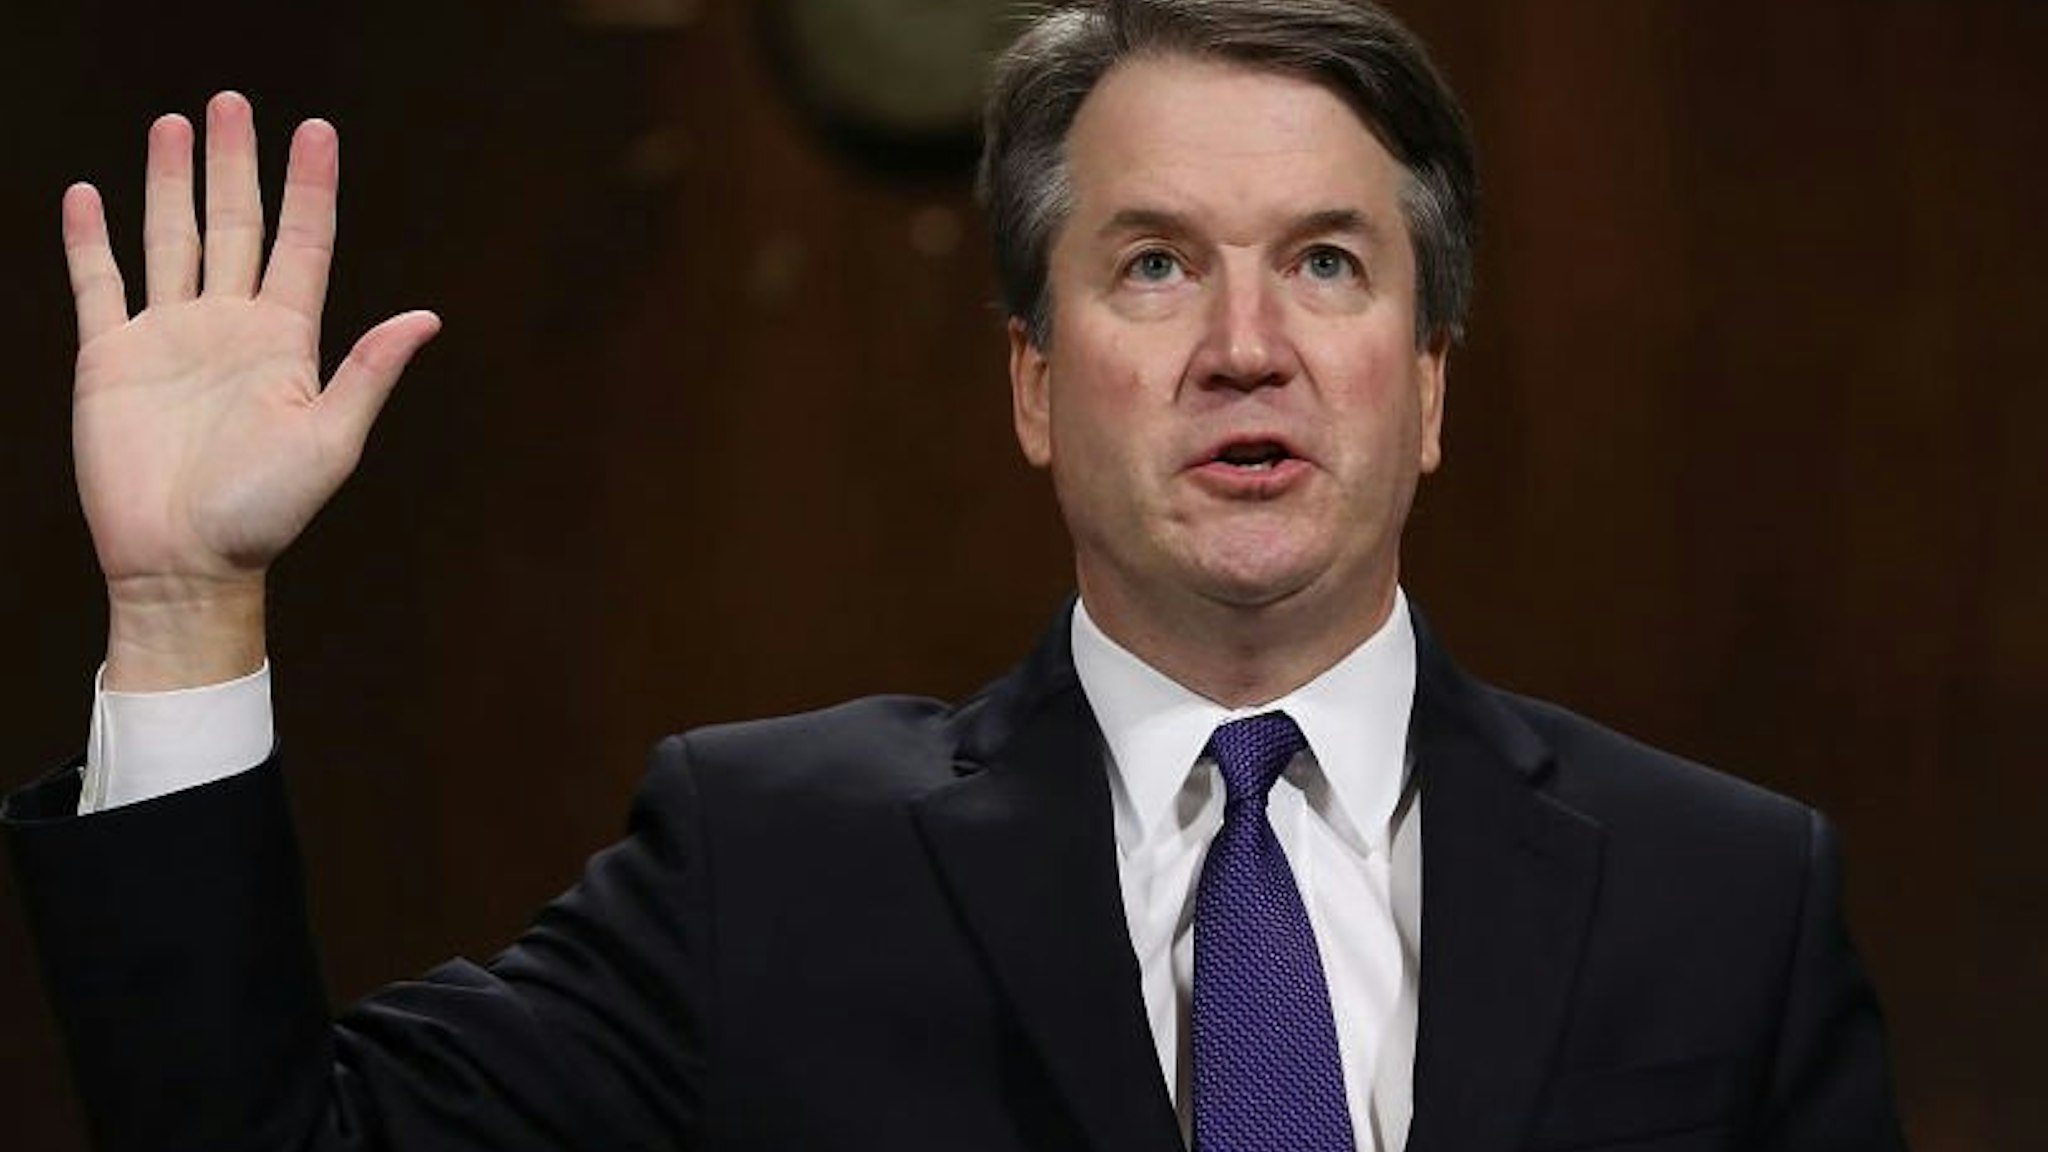 Kavanaugh During His Confirmation Hearing